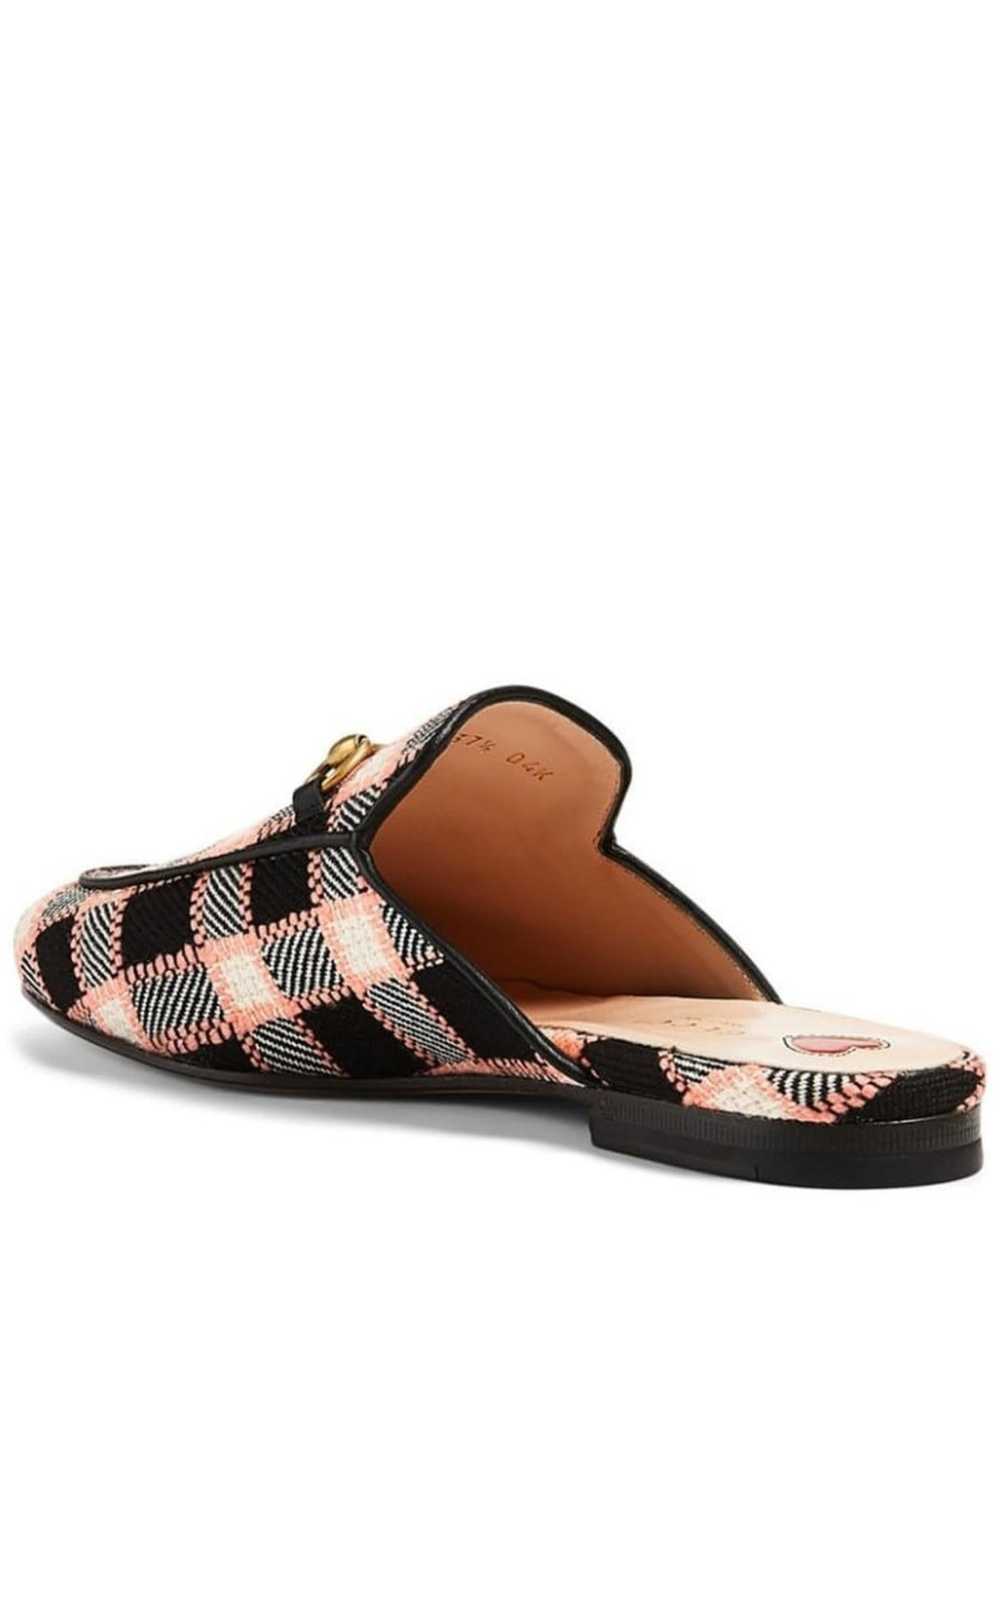 GUCCI Princetown Tweed Check Woven Mules - image 3